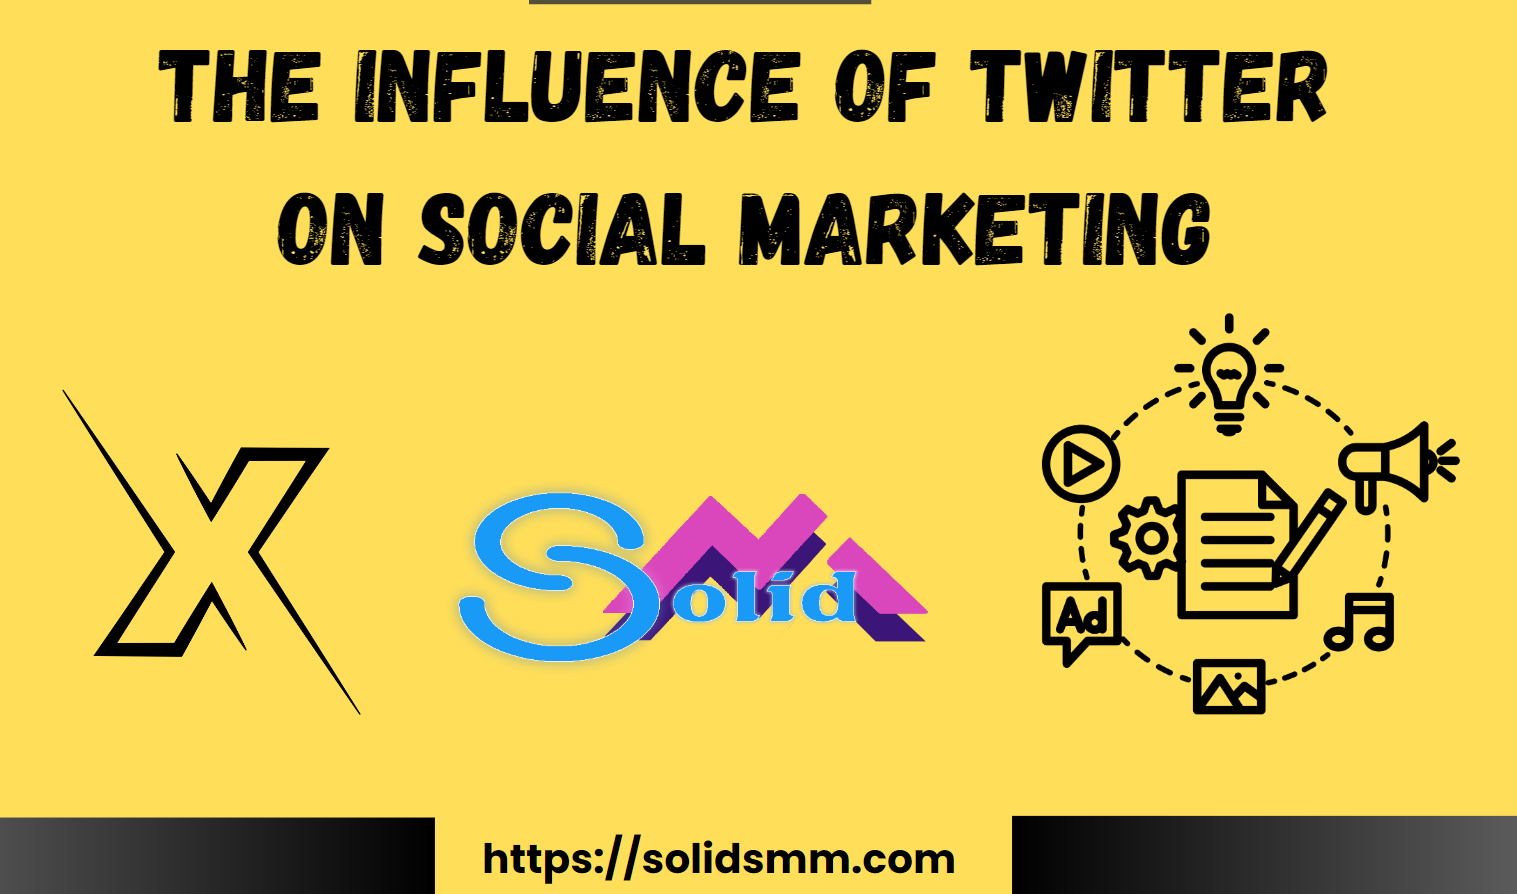 The influence of Twitter on social marketing